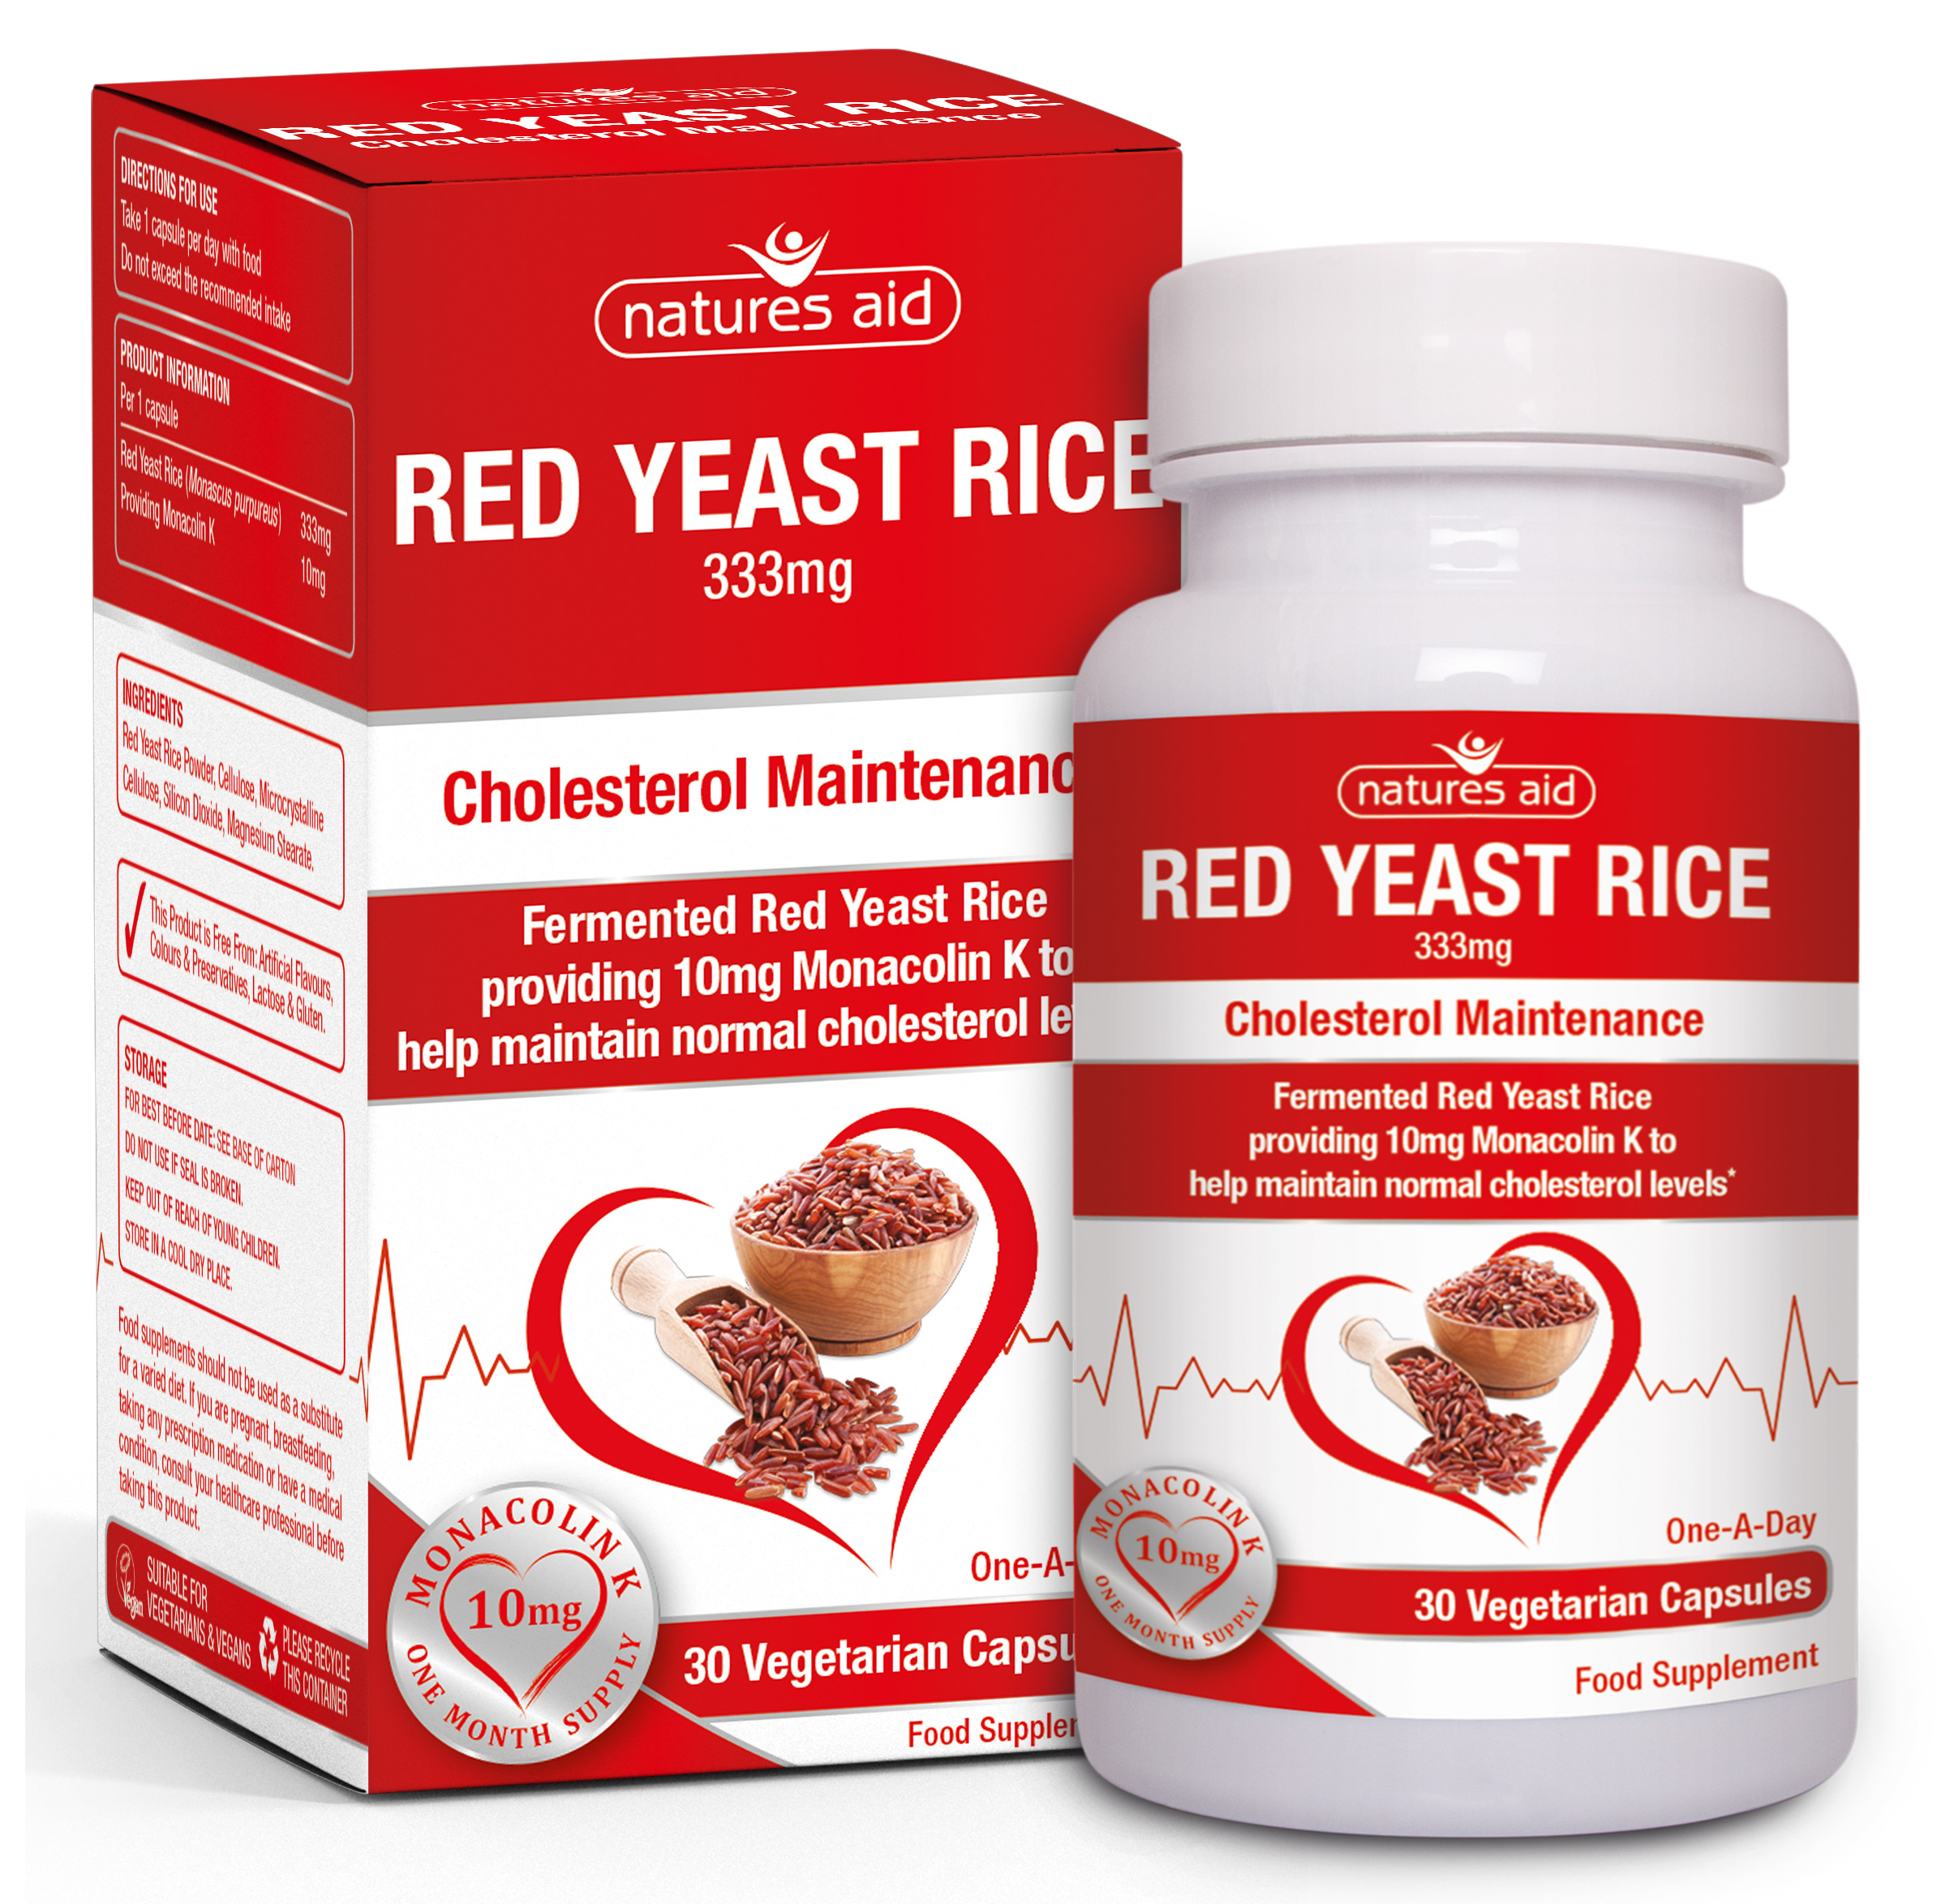 Red Yeast Rice 333mg One-A-Day - Eternal Zest